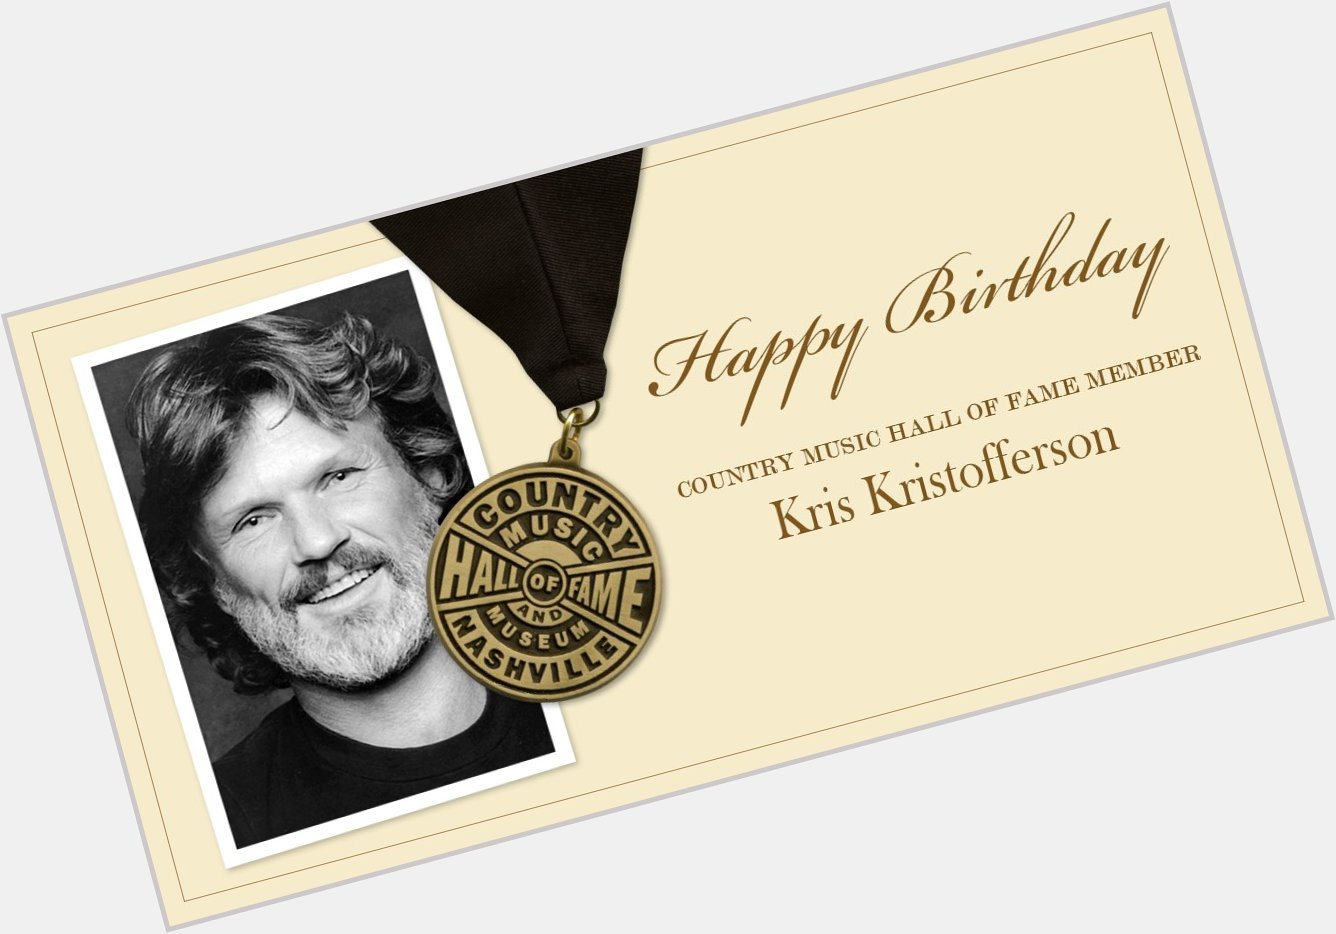 Join us in wishing CMHOF member Kris Kristofferson a very happy birthday today! 